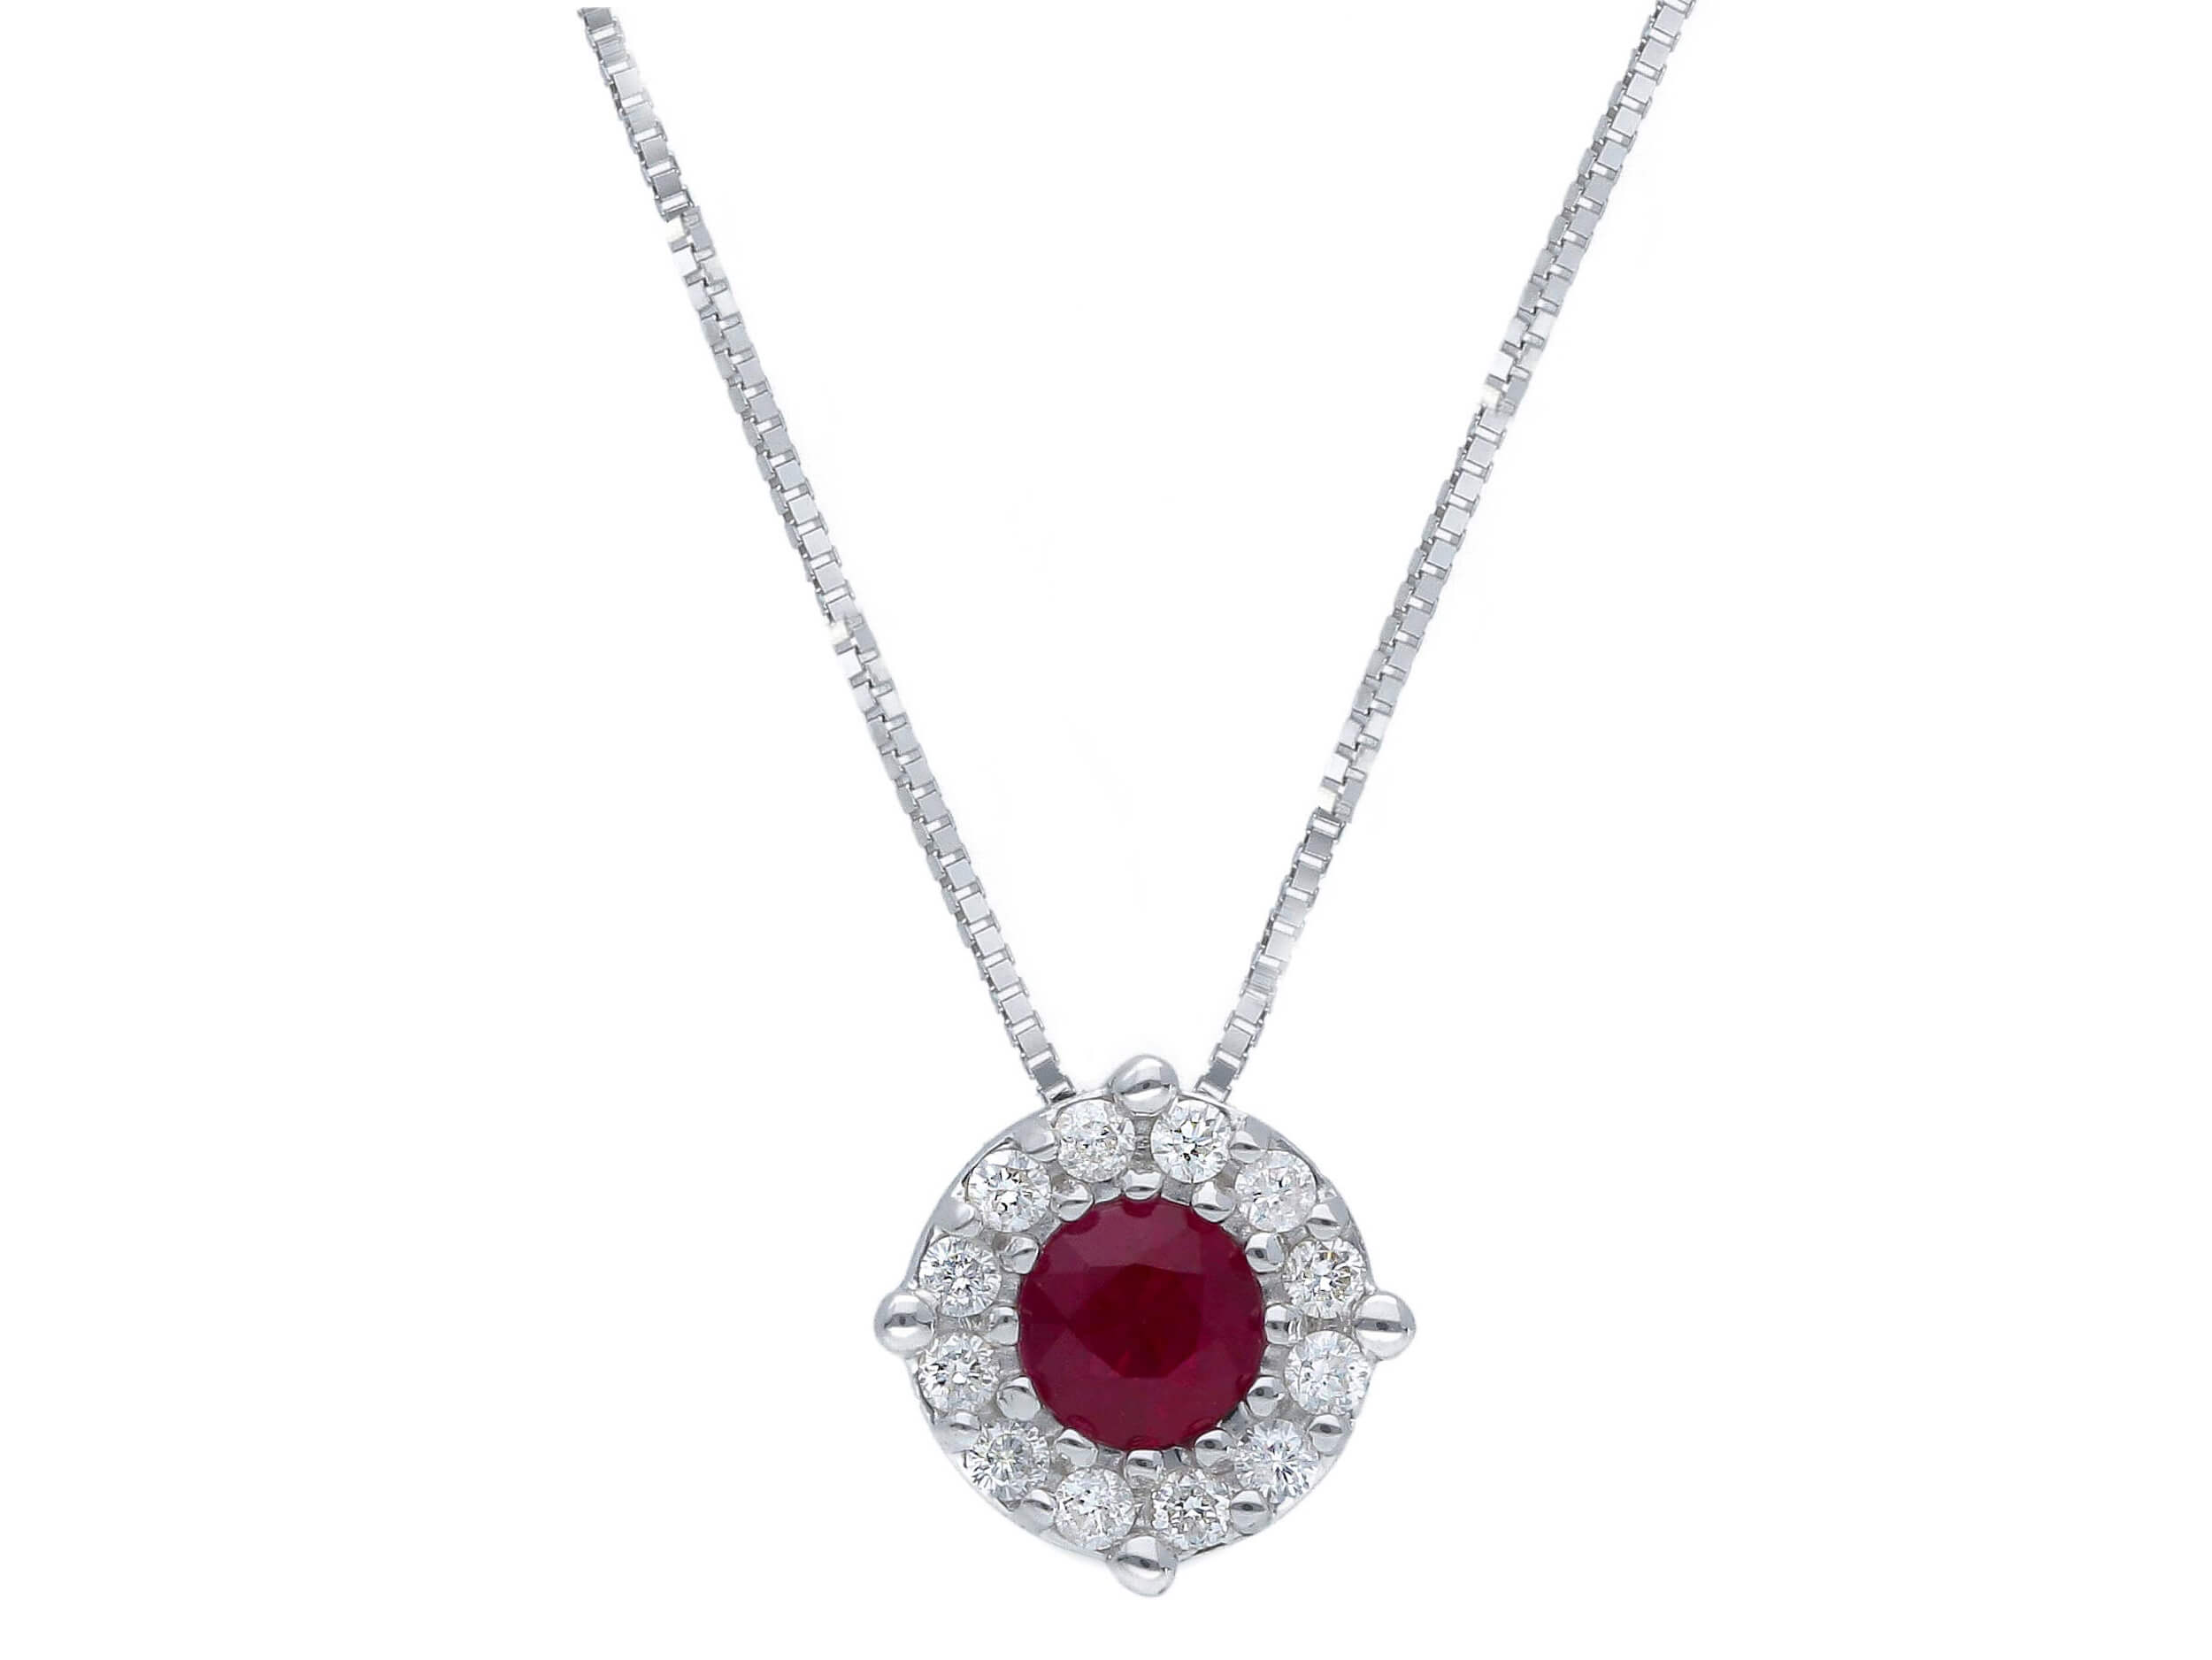 Gold ruby pendant 750% and BELLE EPOQUE diamonds Art. 264176RB